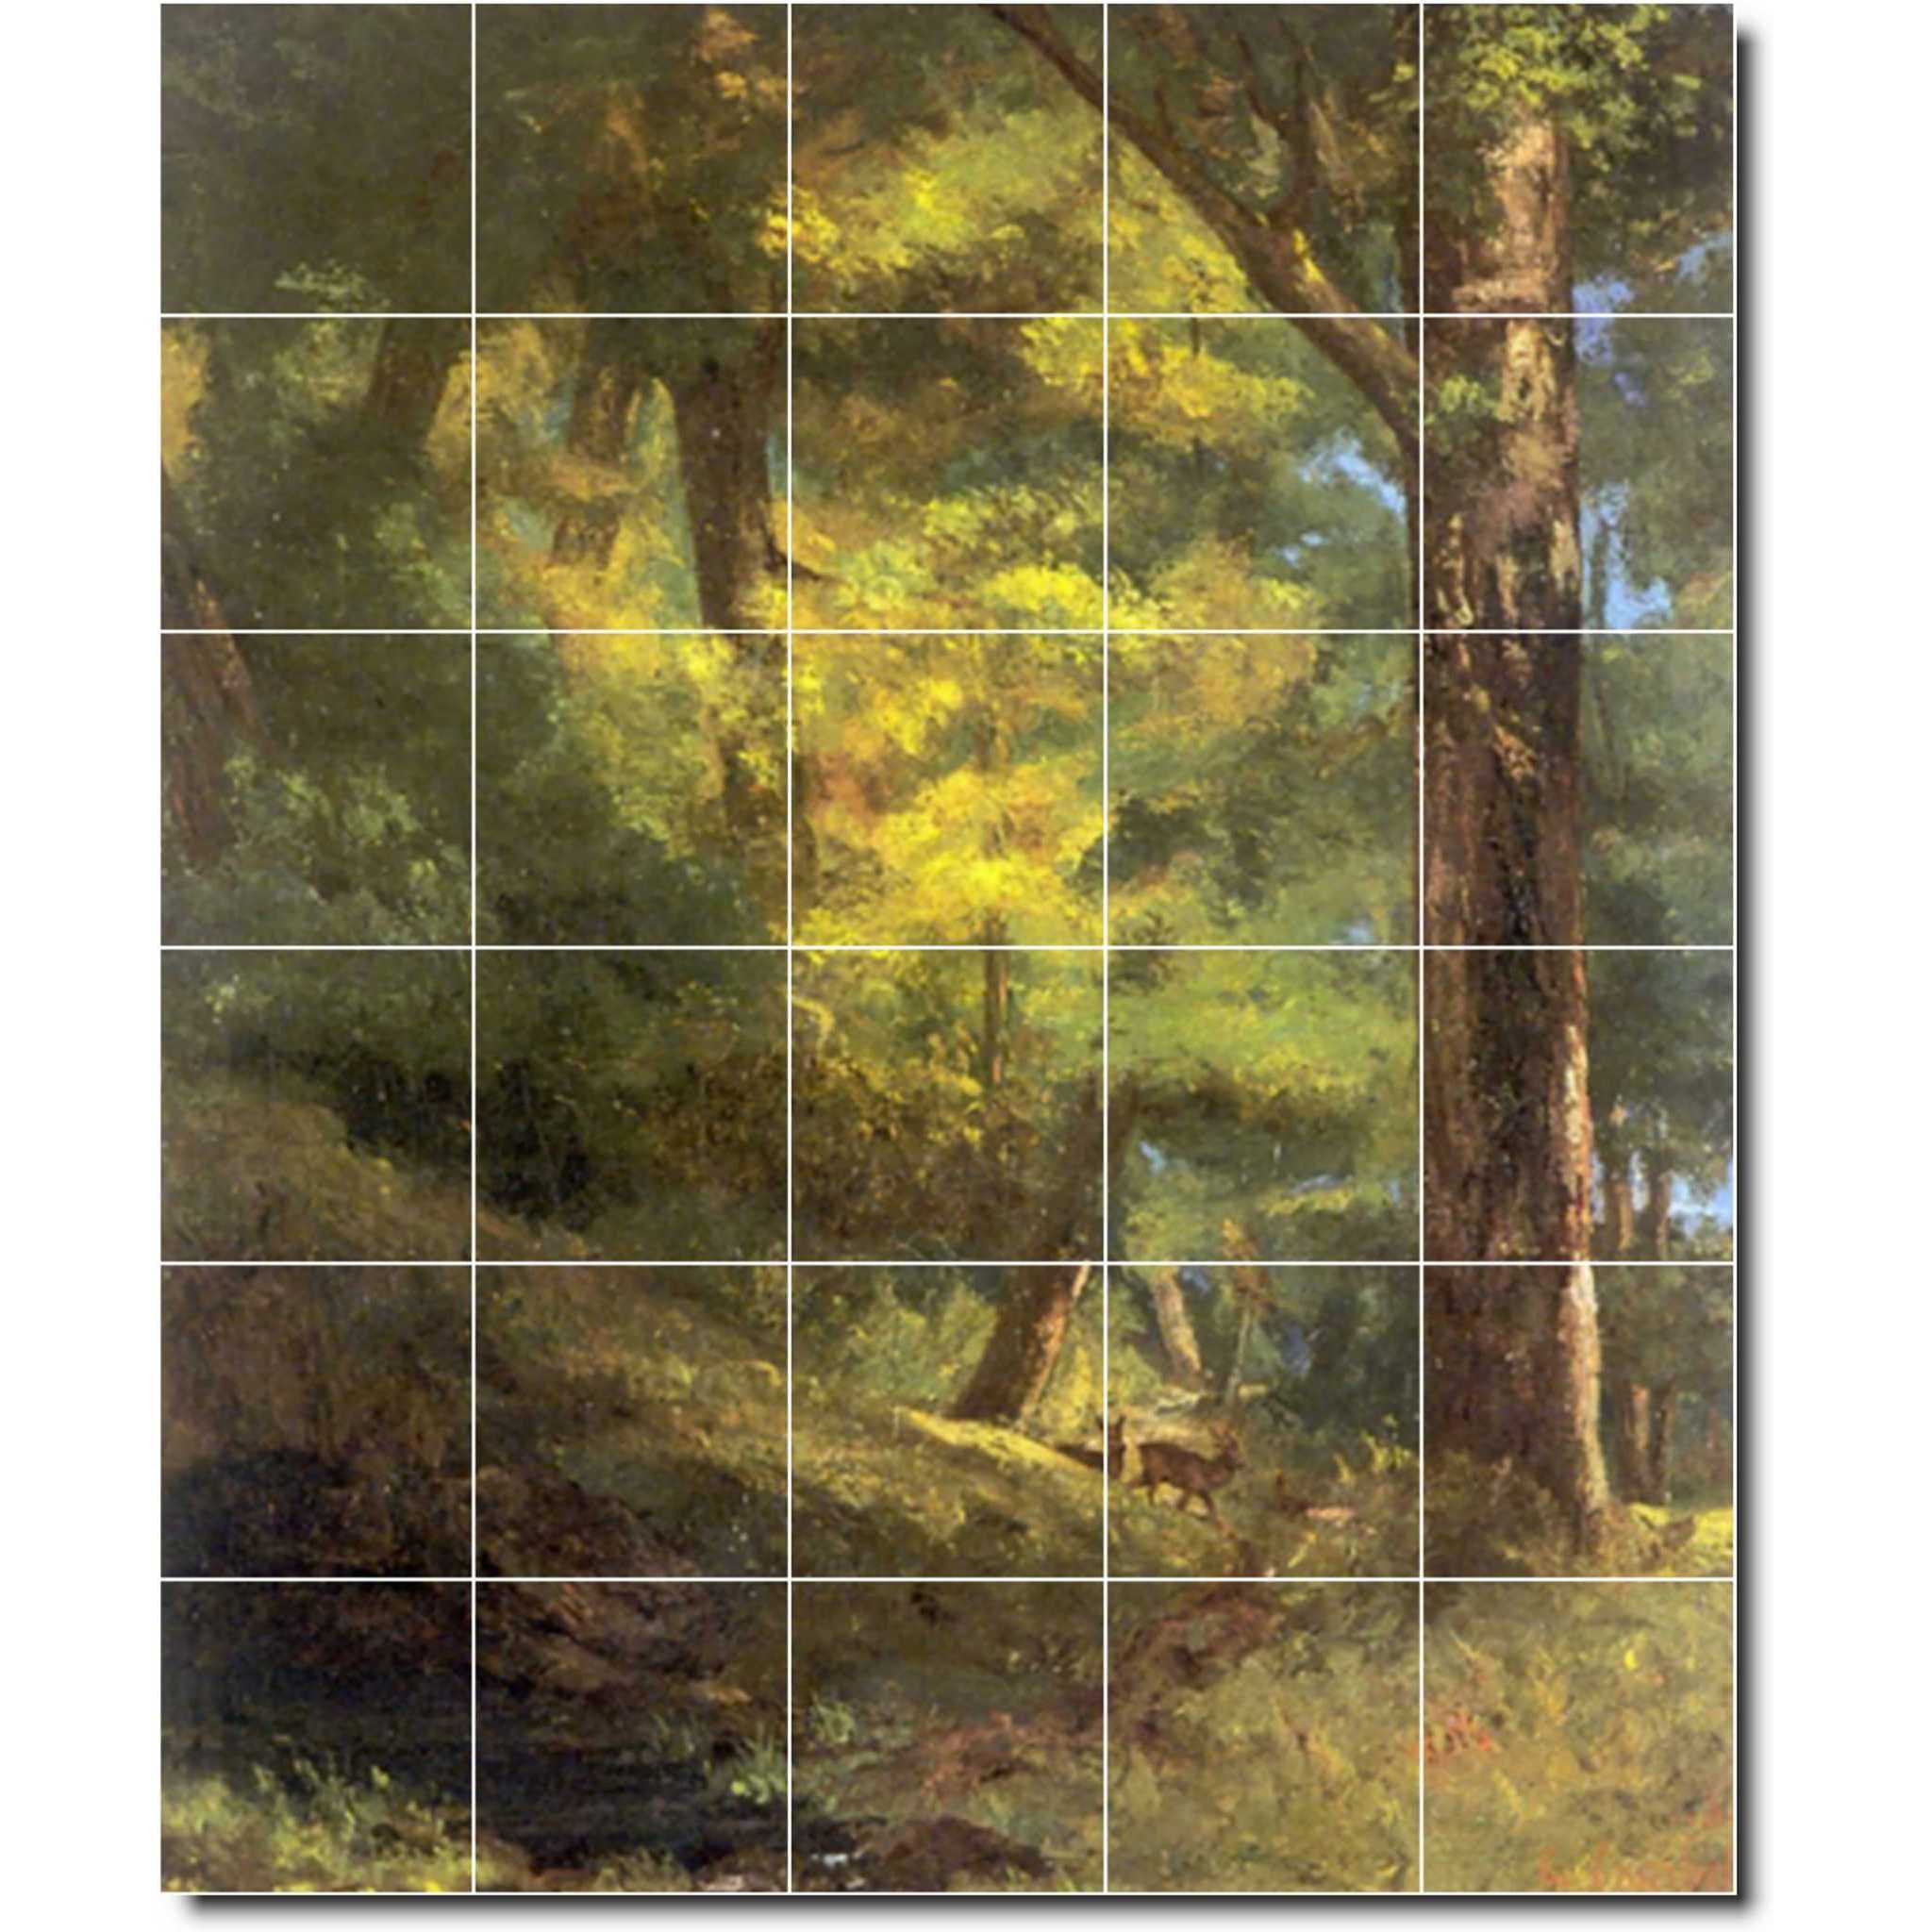 gustave courbet country painting ceramic tile mural p02169